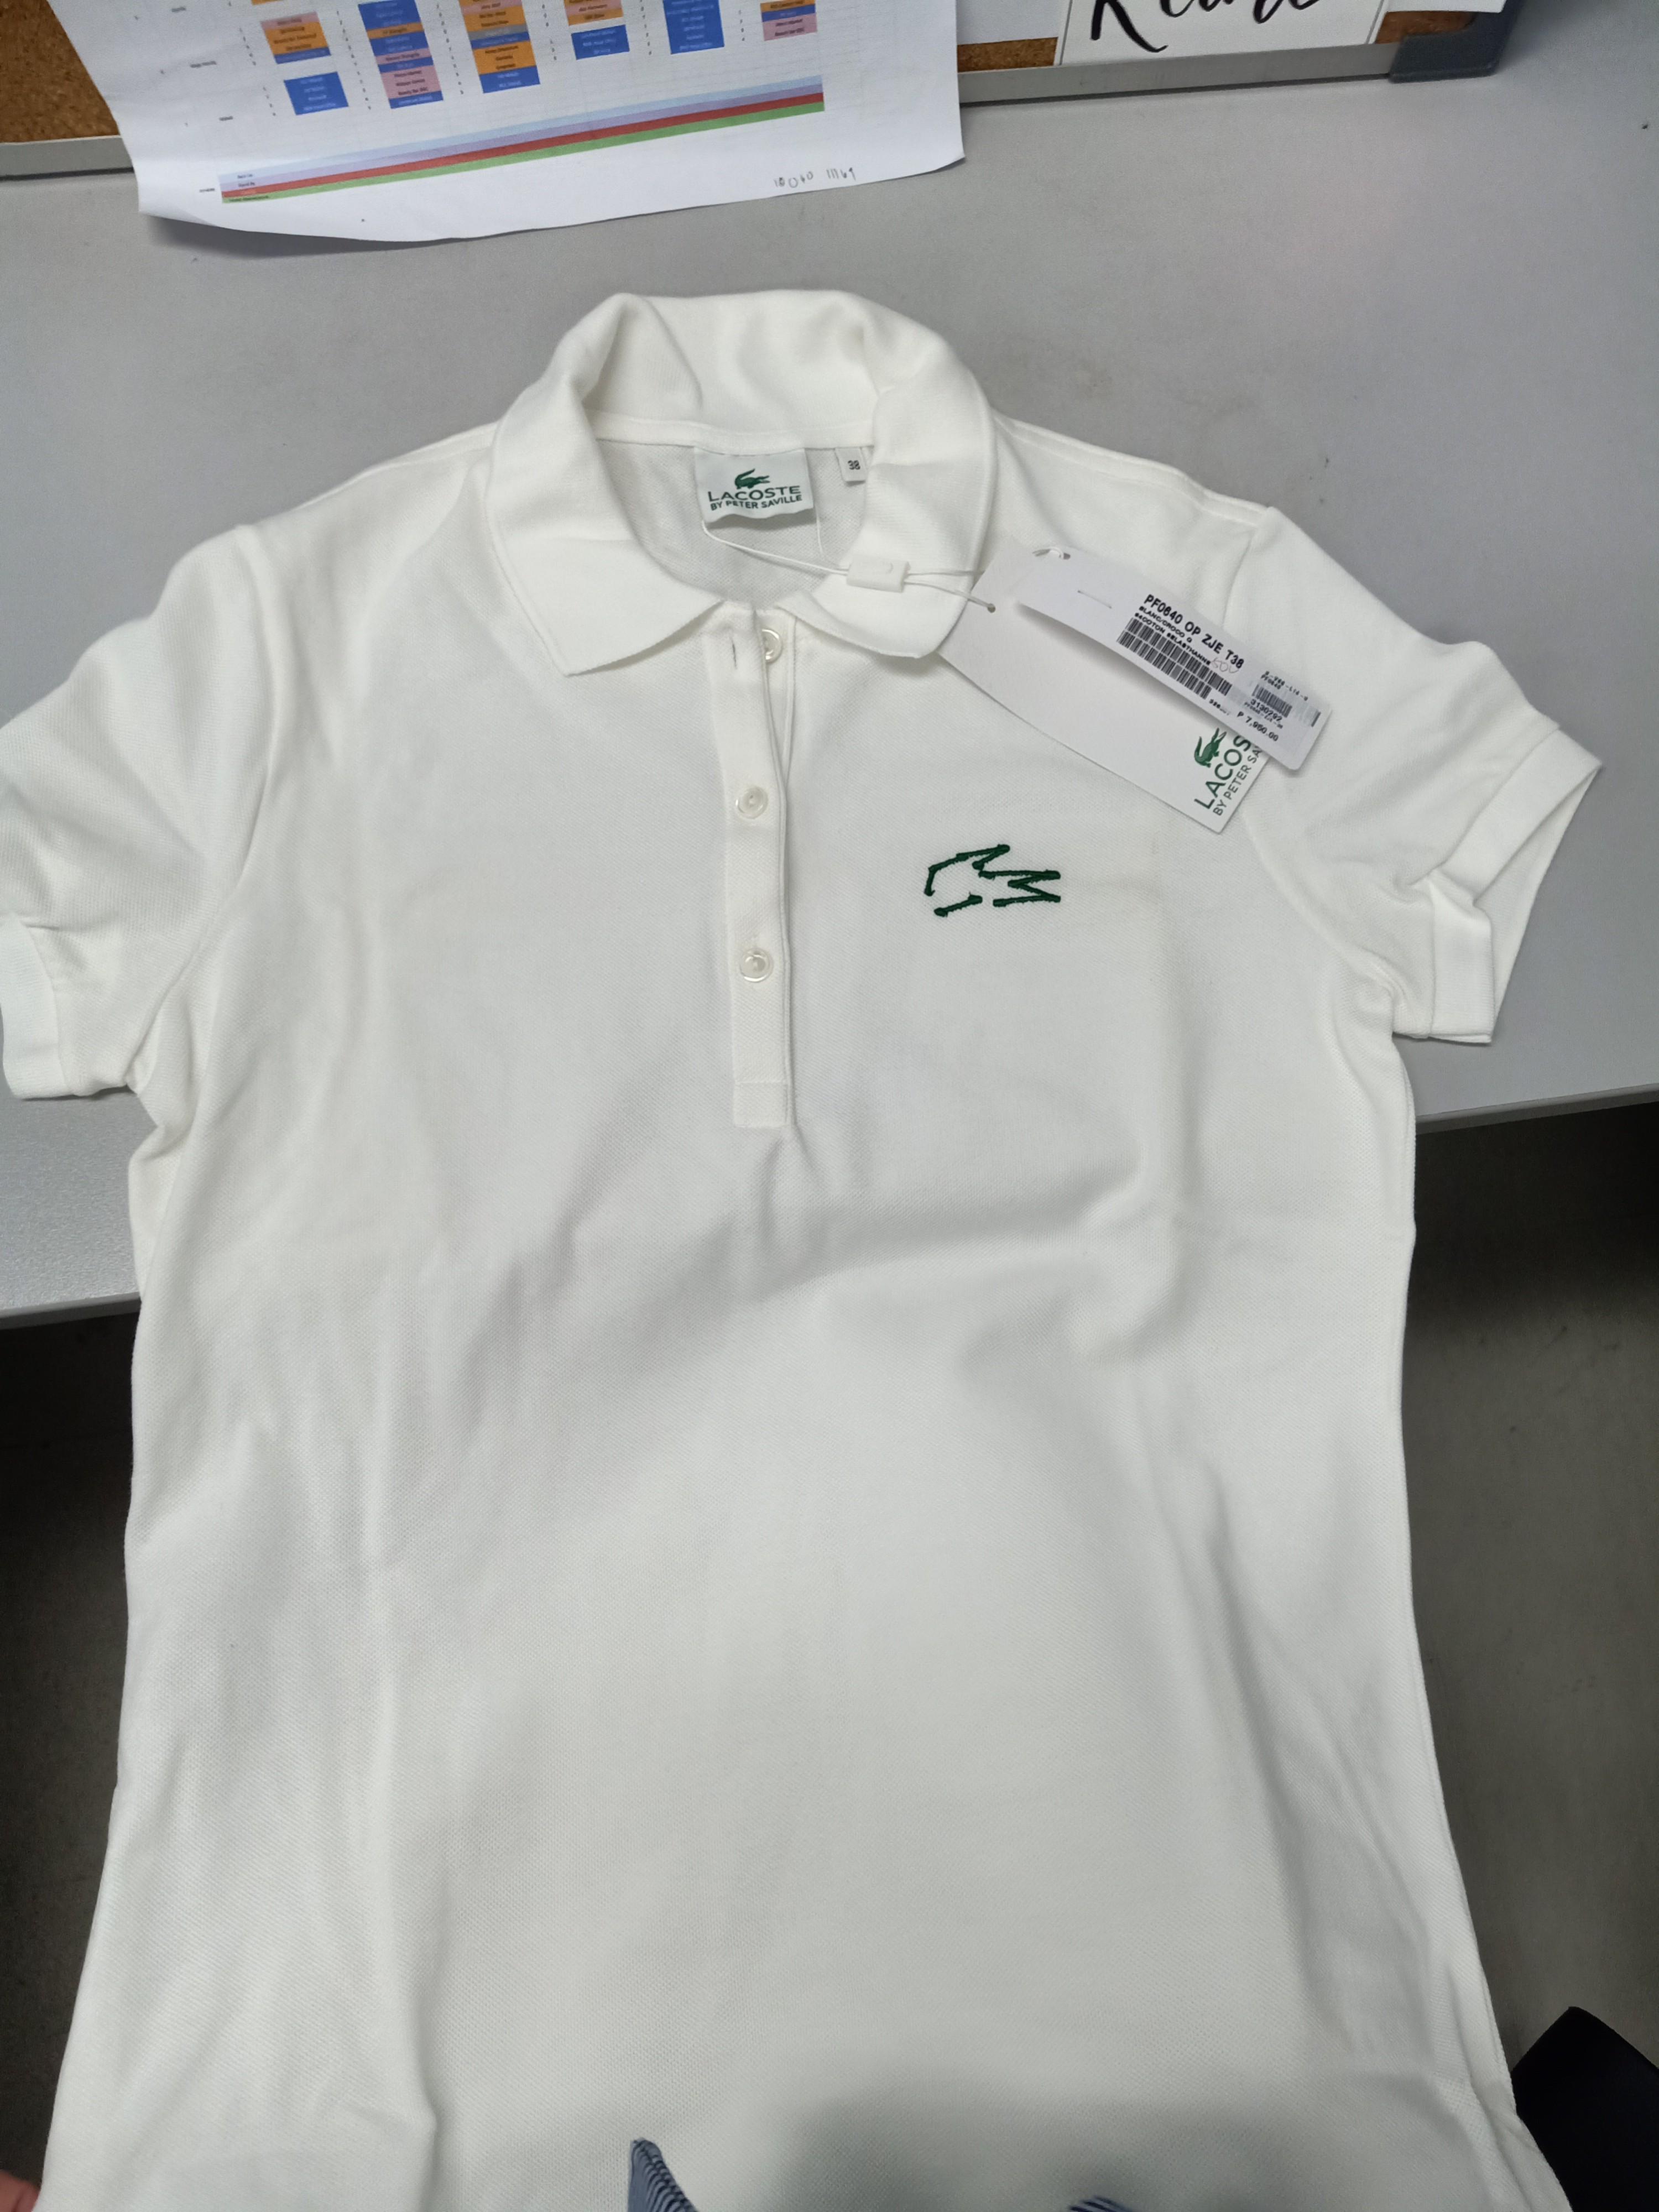 Lacoste by Peter Women's Fashion, Others on Carousell